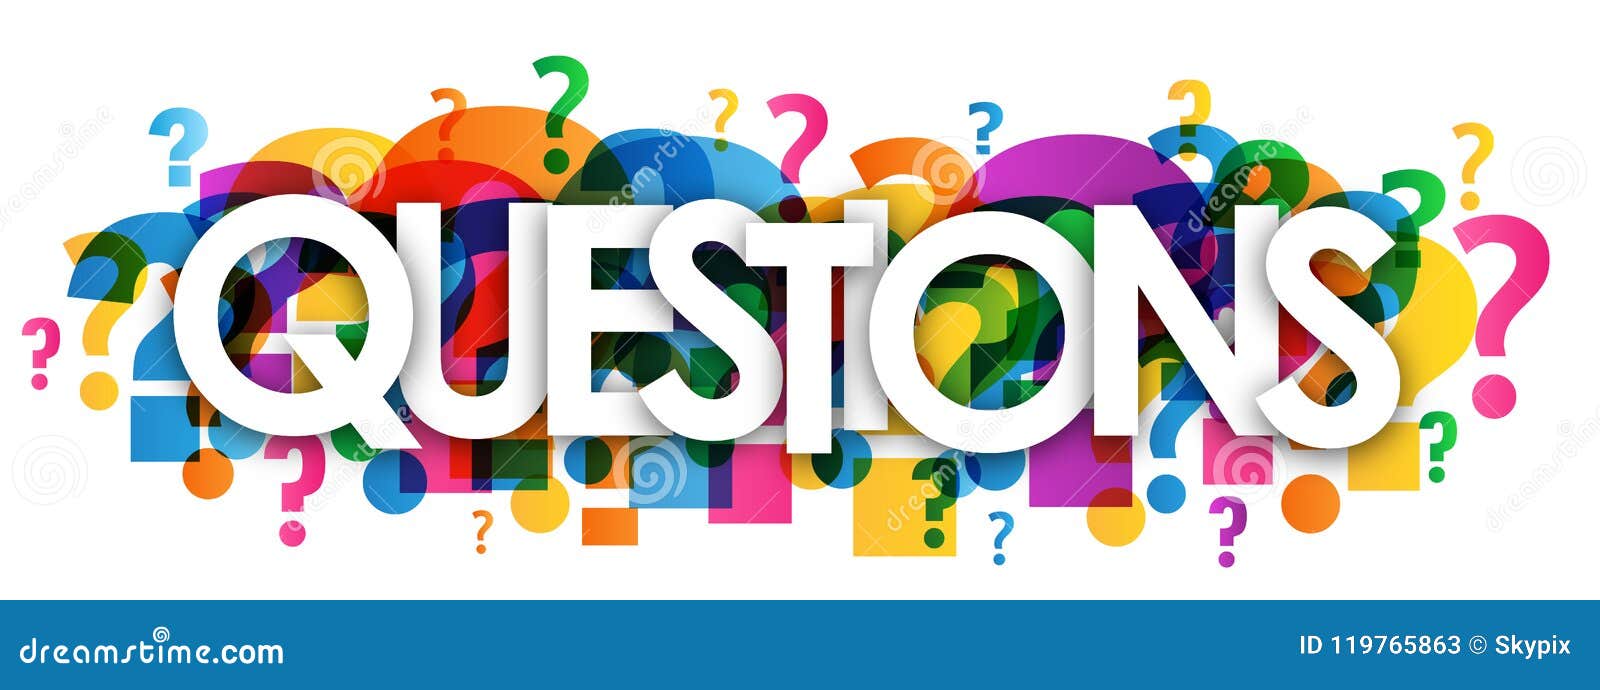 questions colorful overlapping question marks banner